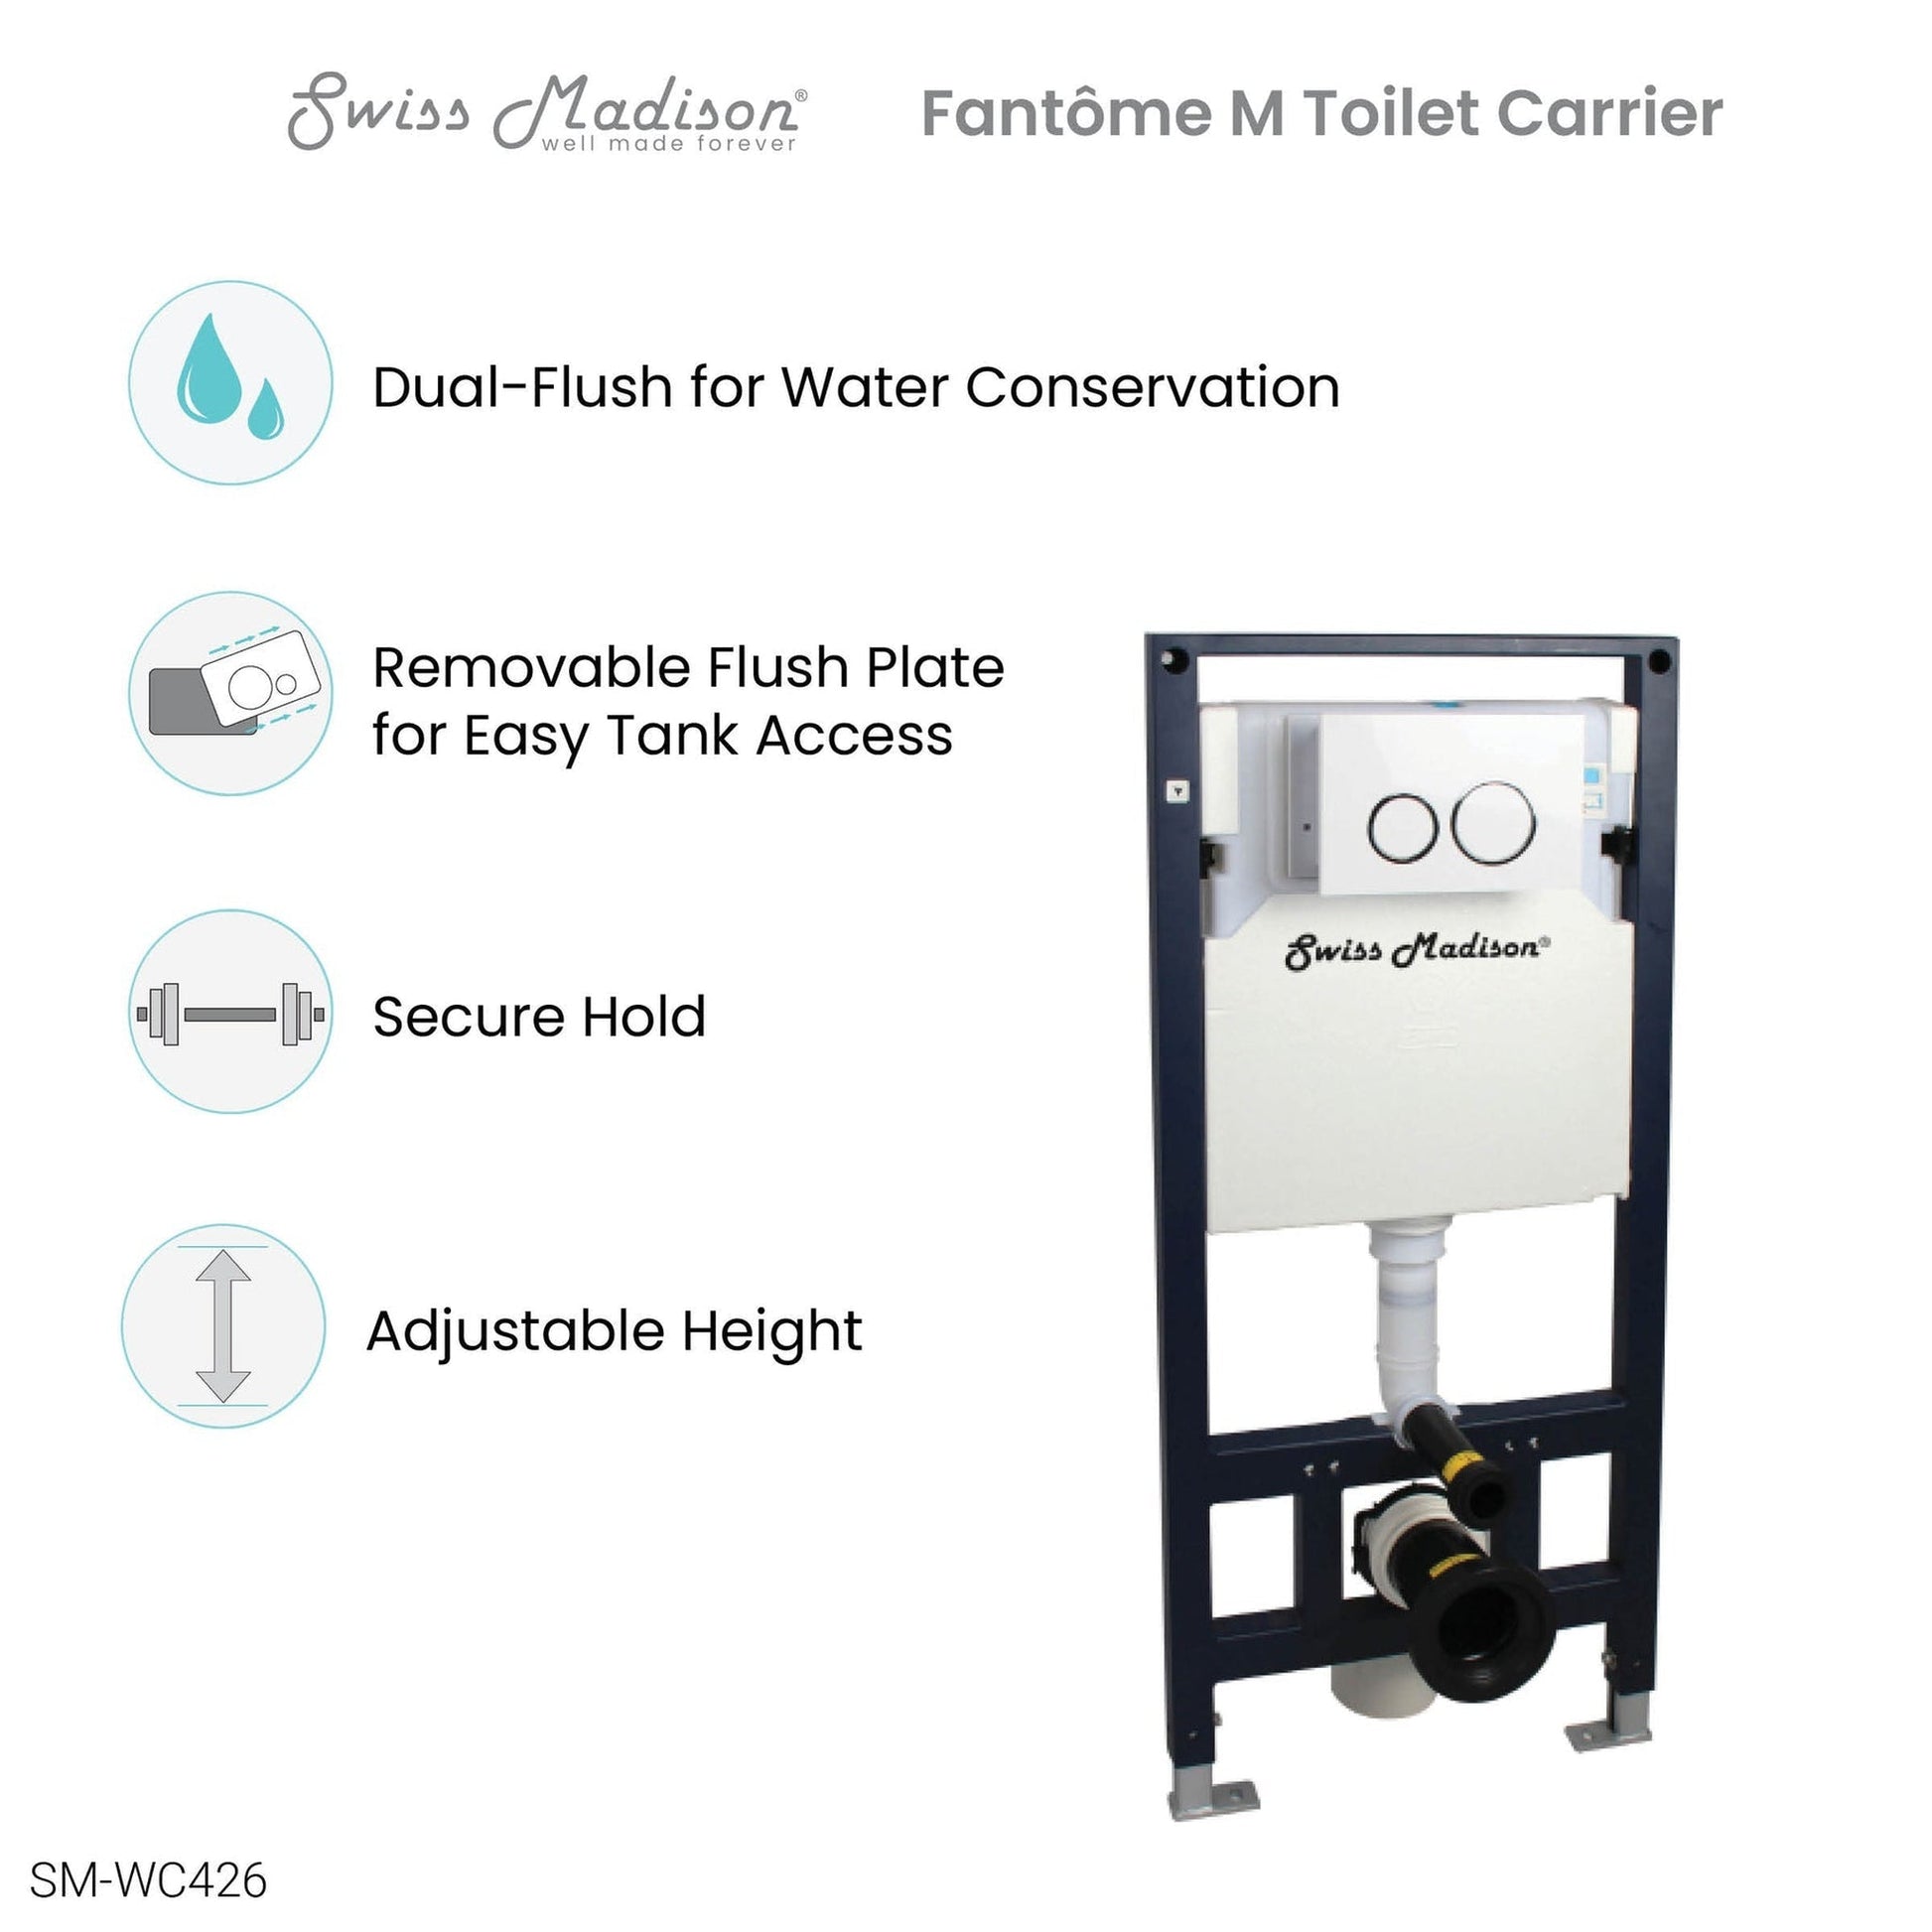 Swiss Madison Fantôme M 2x6 Steel Frame Insulated In-Wall Toilet Tank Carrier System For Wall-Hung Toilet